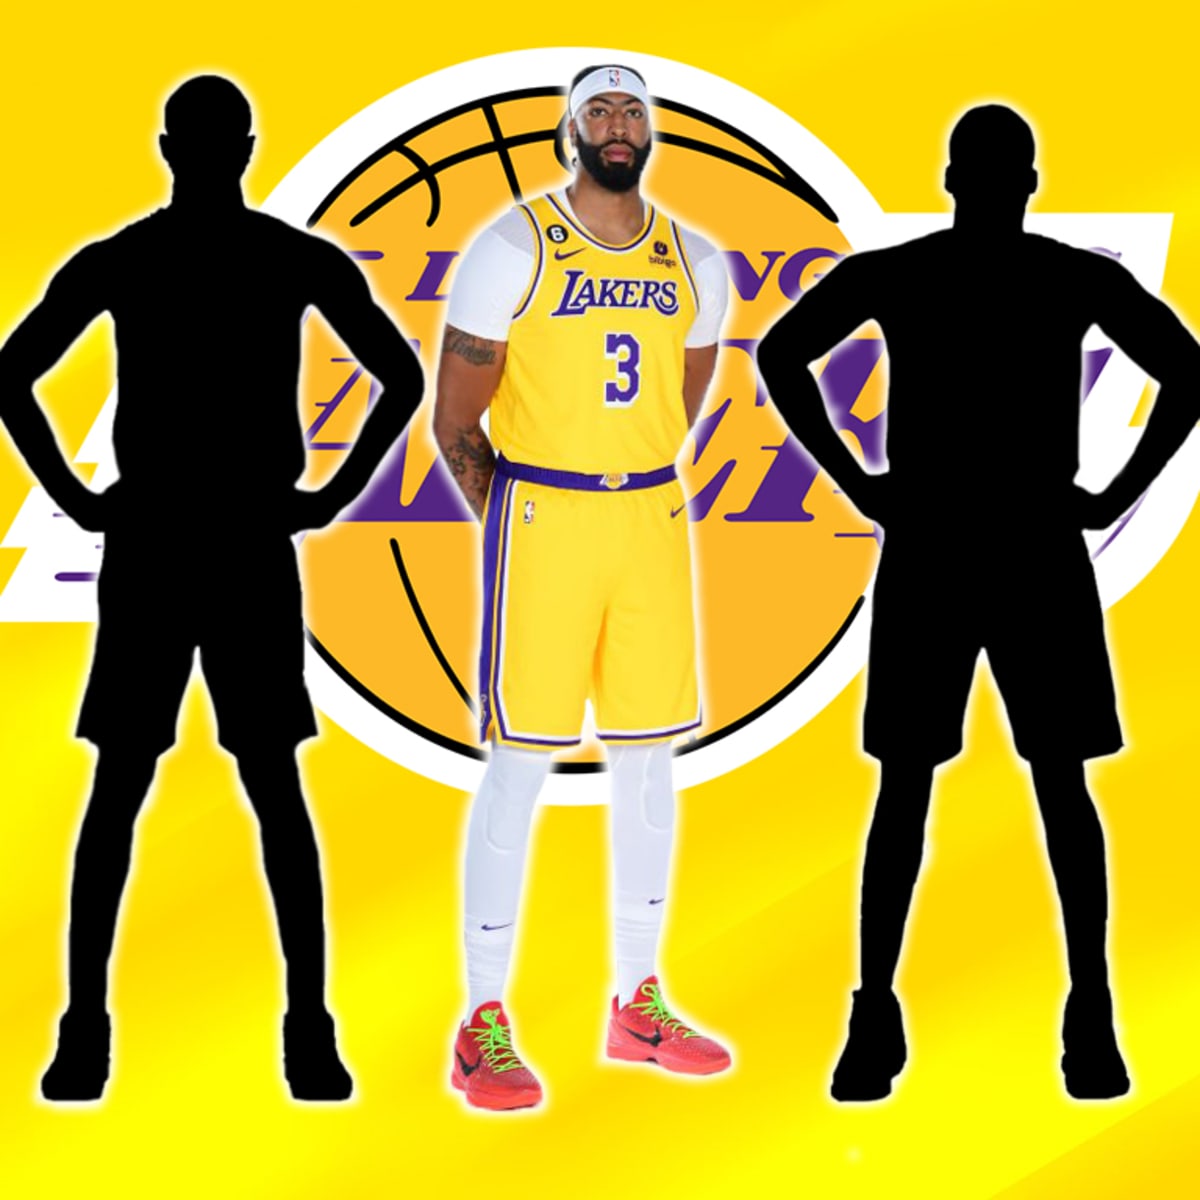 Lakers Happy Birthday Snack Pack- Is Anthony Davis Ready To Be The MVP?  Plus Our Merch Site Is LIVE! 